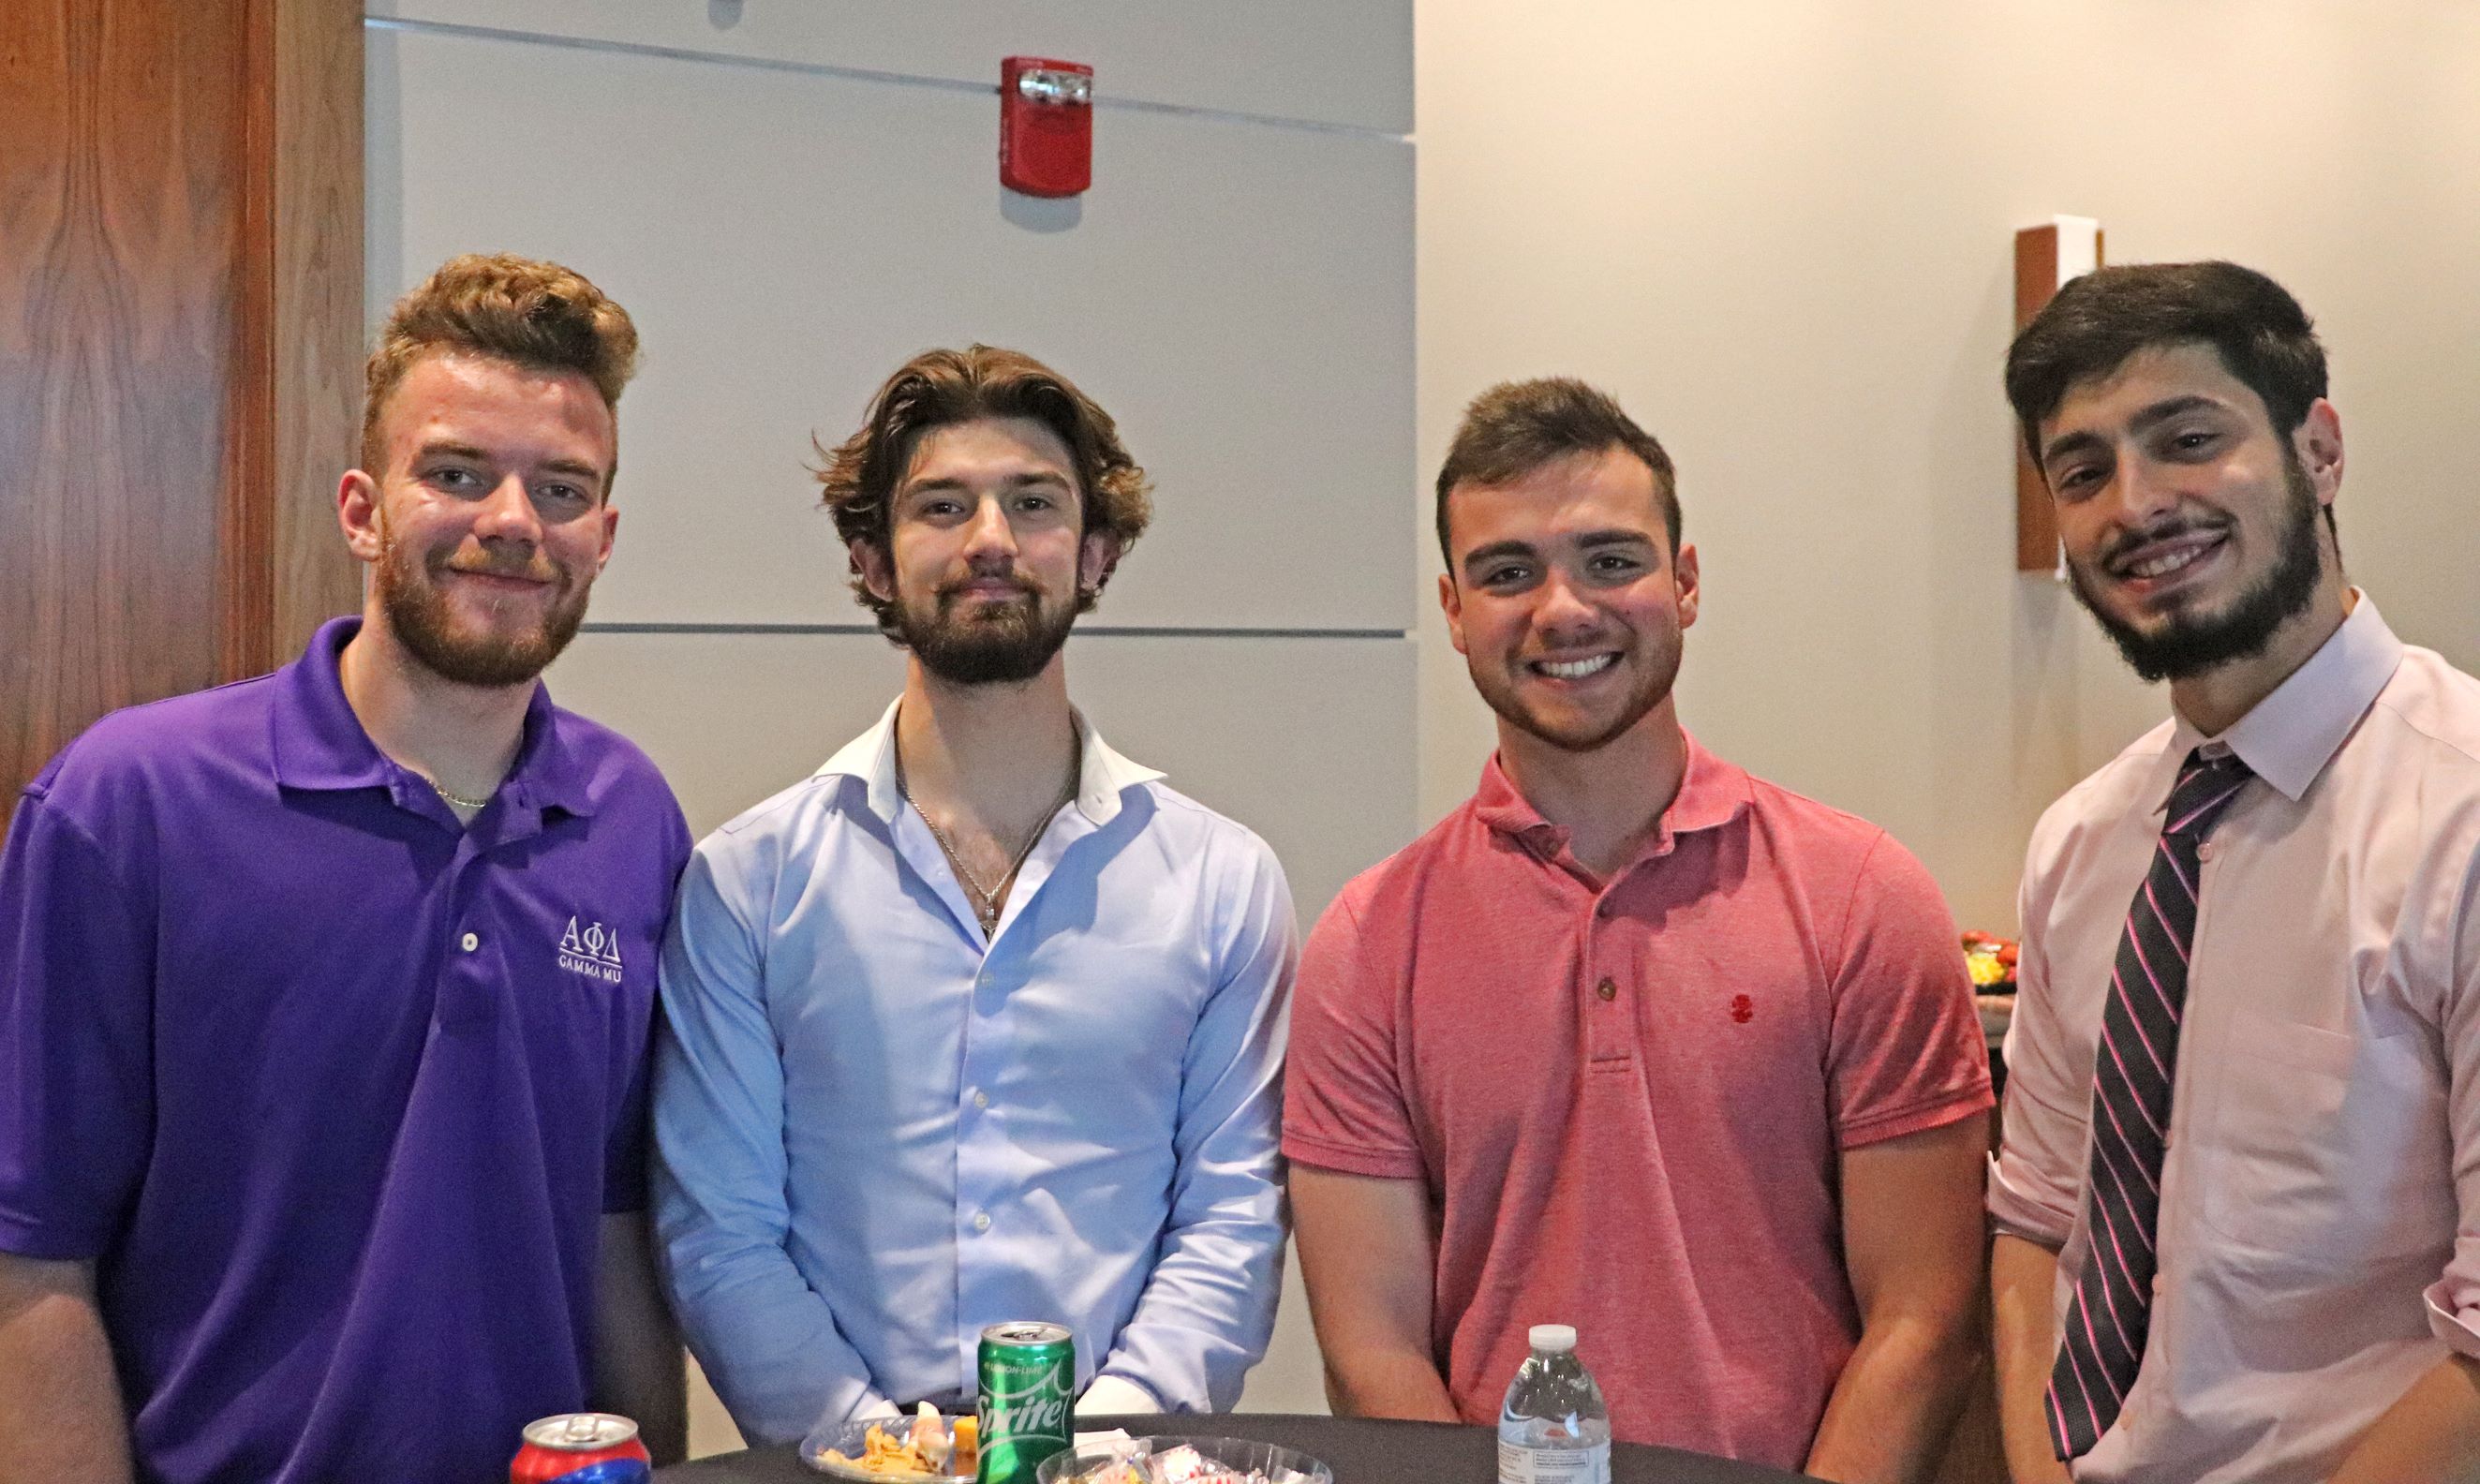 Junior Trevor Bunero, a Business Studies/Marketing major who hopes to begin crafting his personal brand with tips he picked up at the workshops, stands with friends at the Young Leaders Expo.